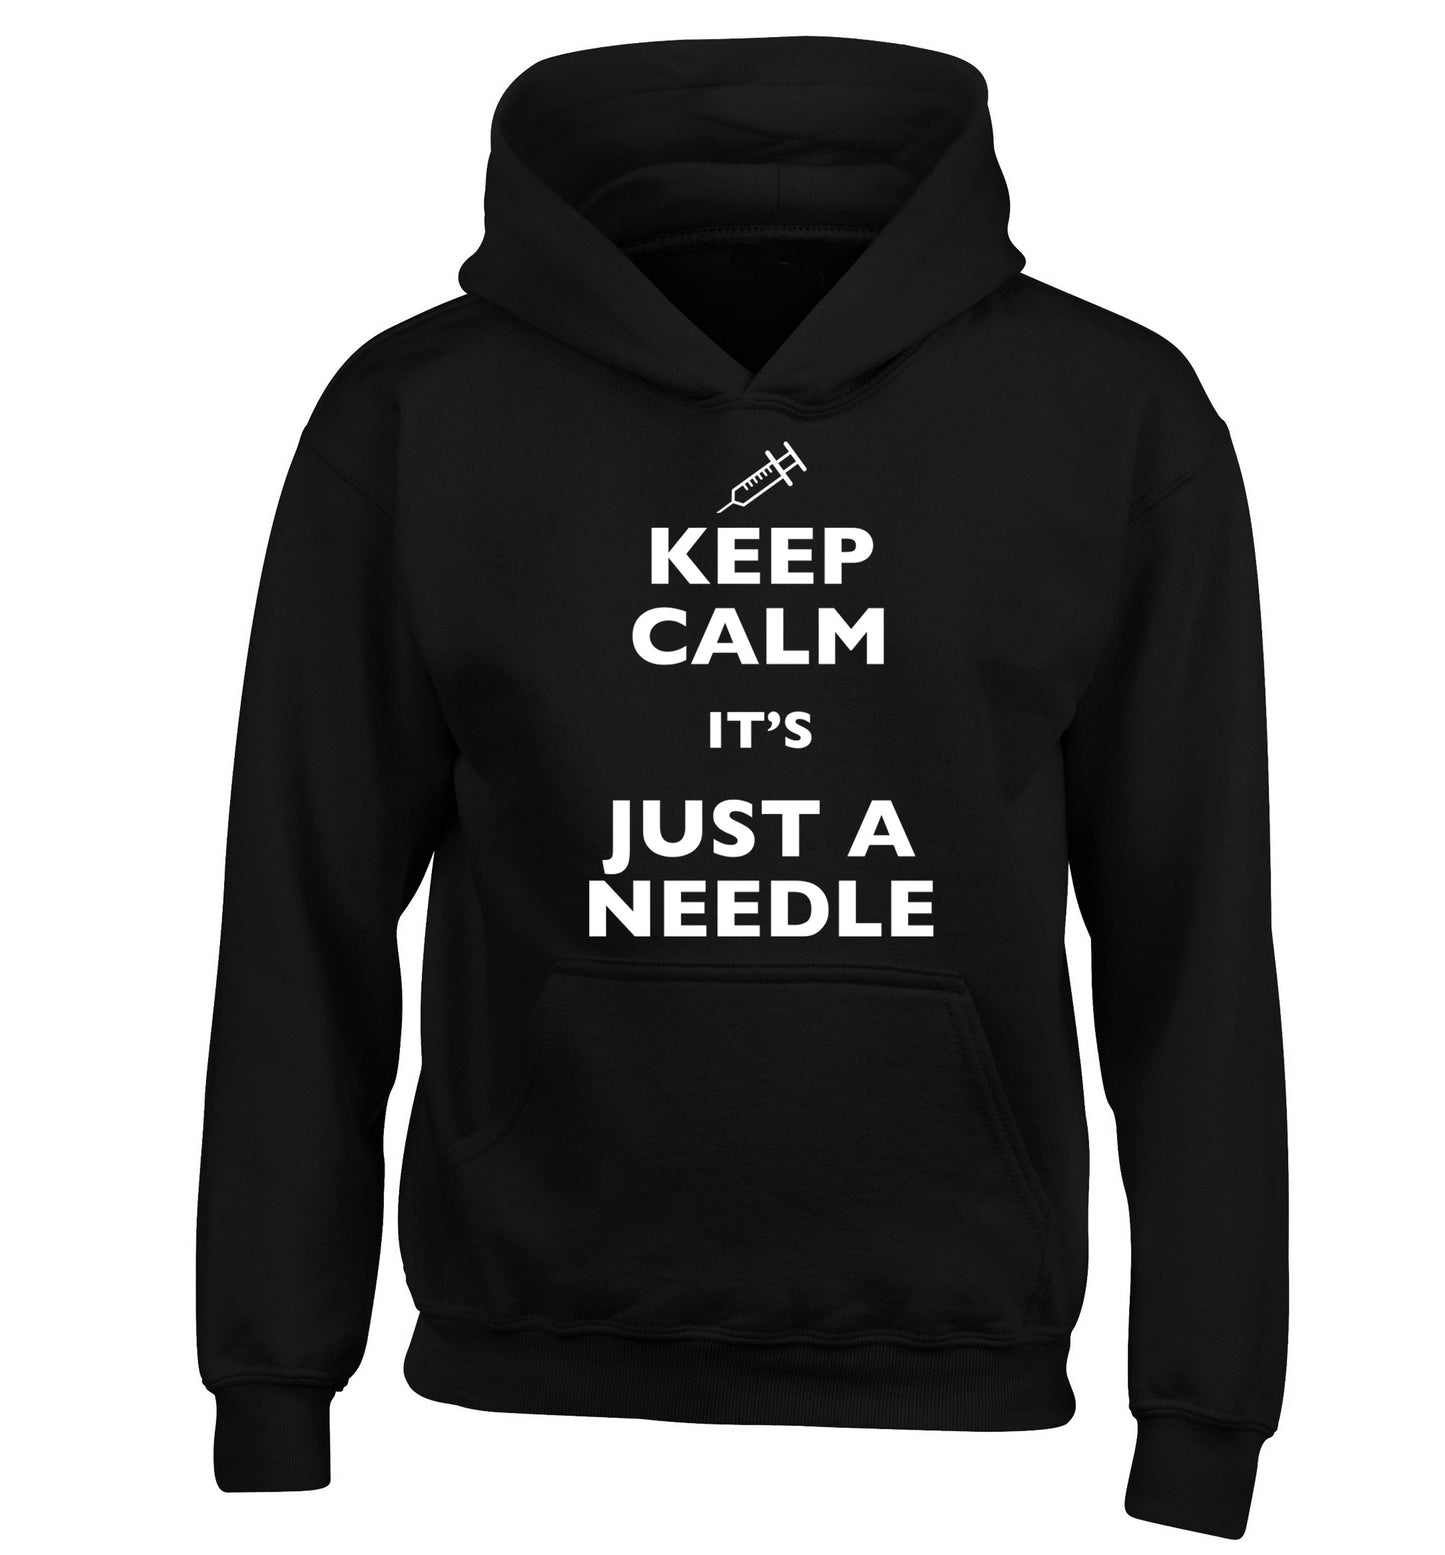 Keep calm it's only a needle children's black hoodie 12-14 Years